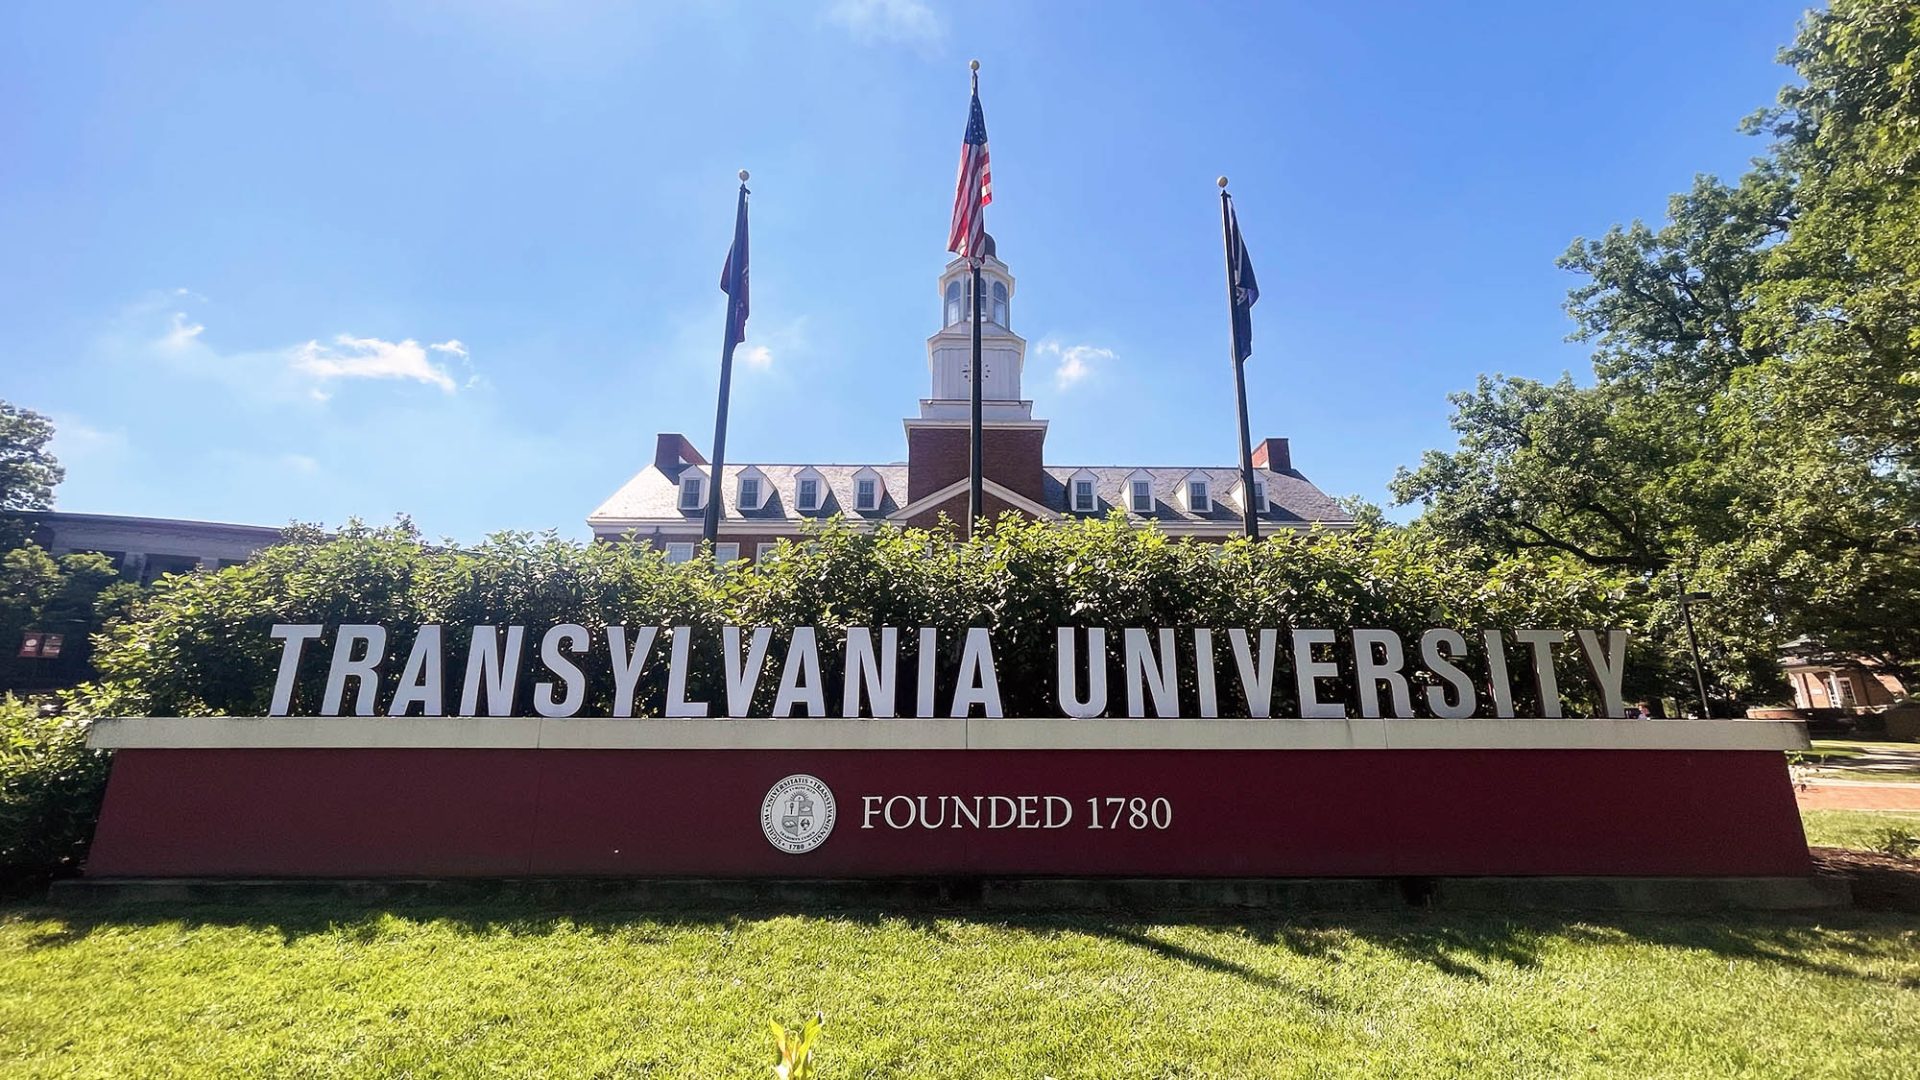 Transylvania welcomes transfers displaced by DIII college closure